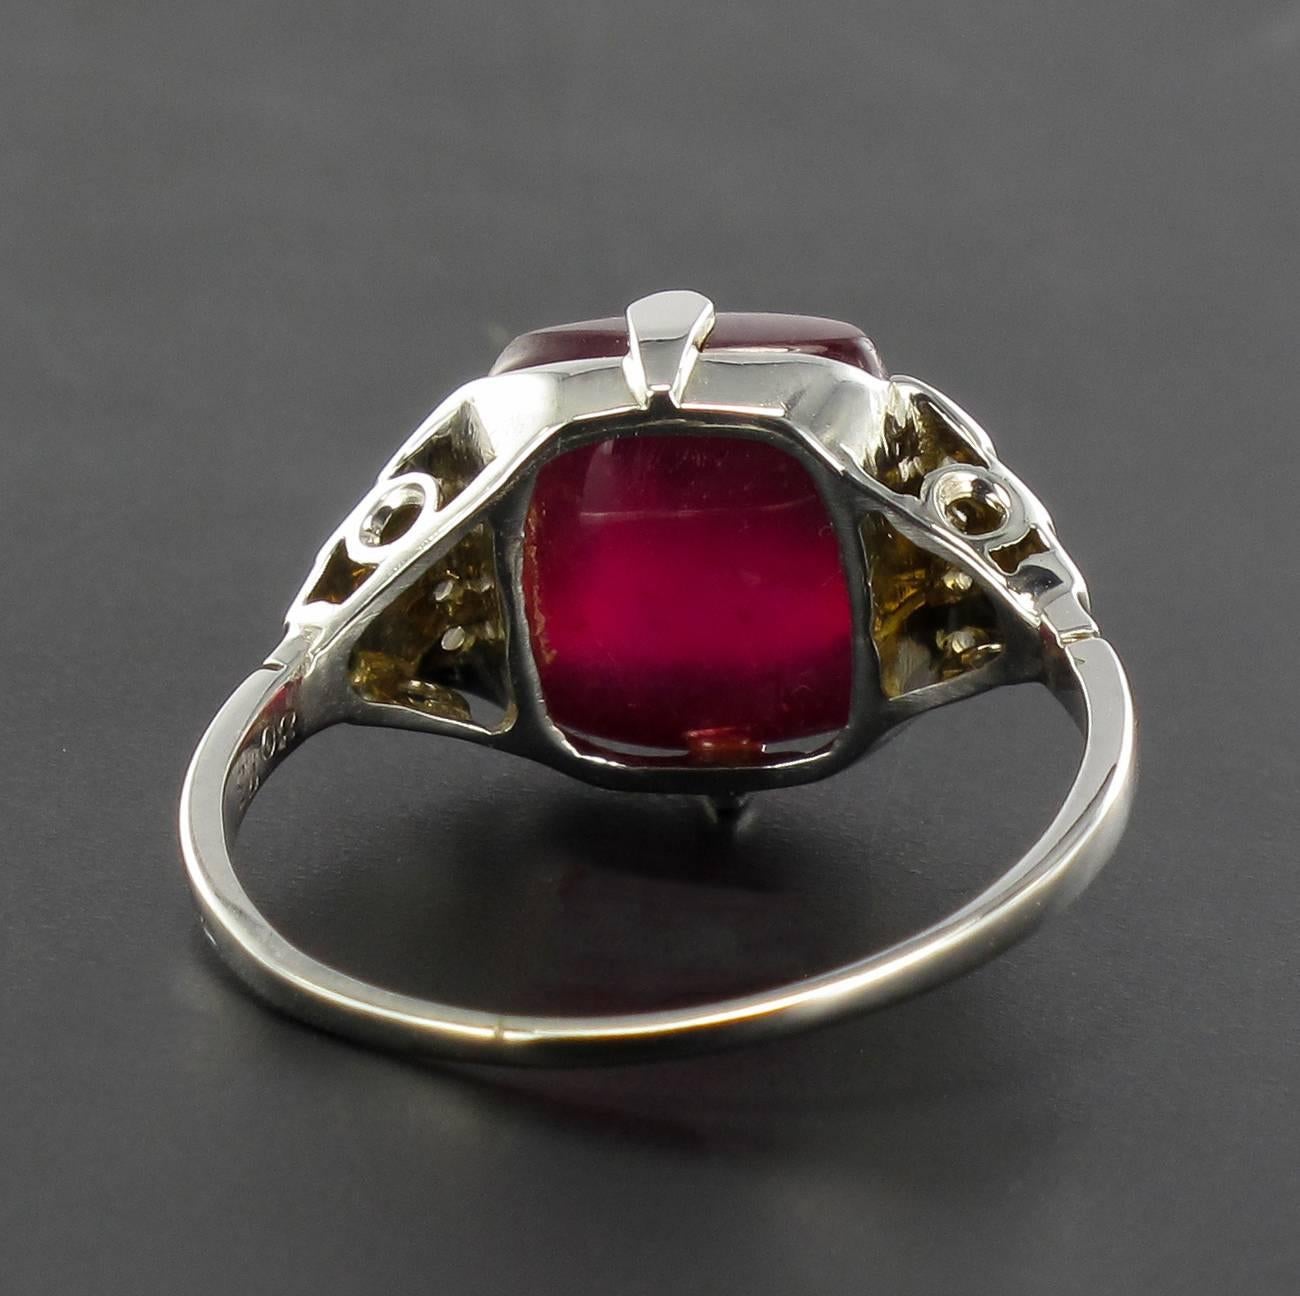 French Art Deco 8.93 Carat Ruby and Diamond Ring 1